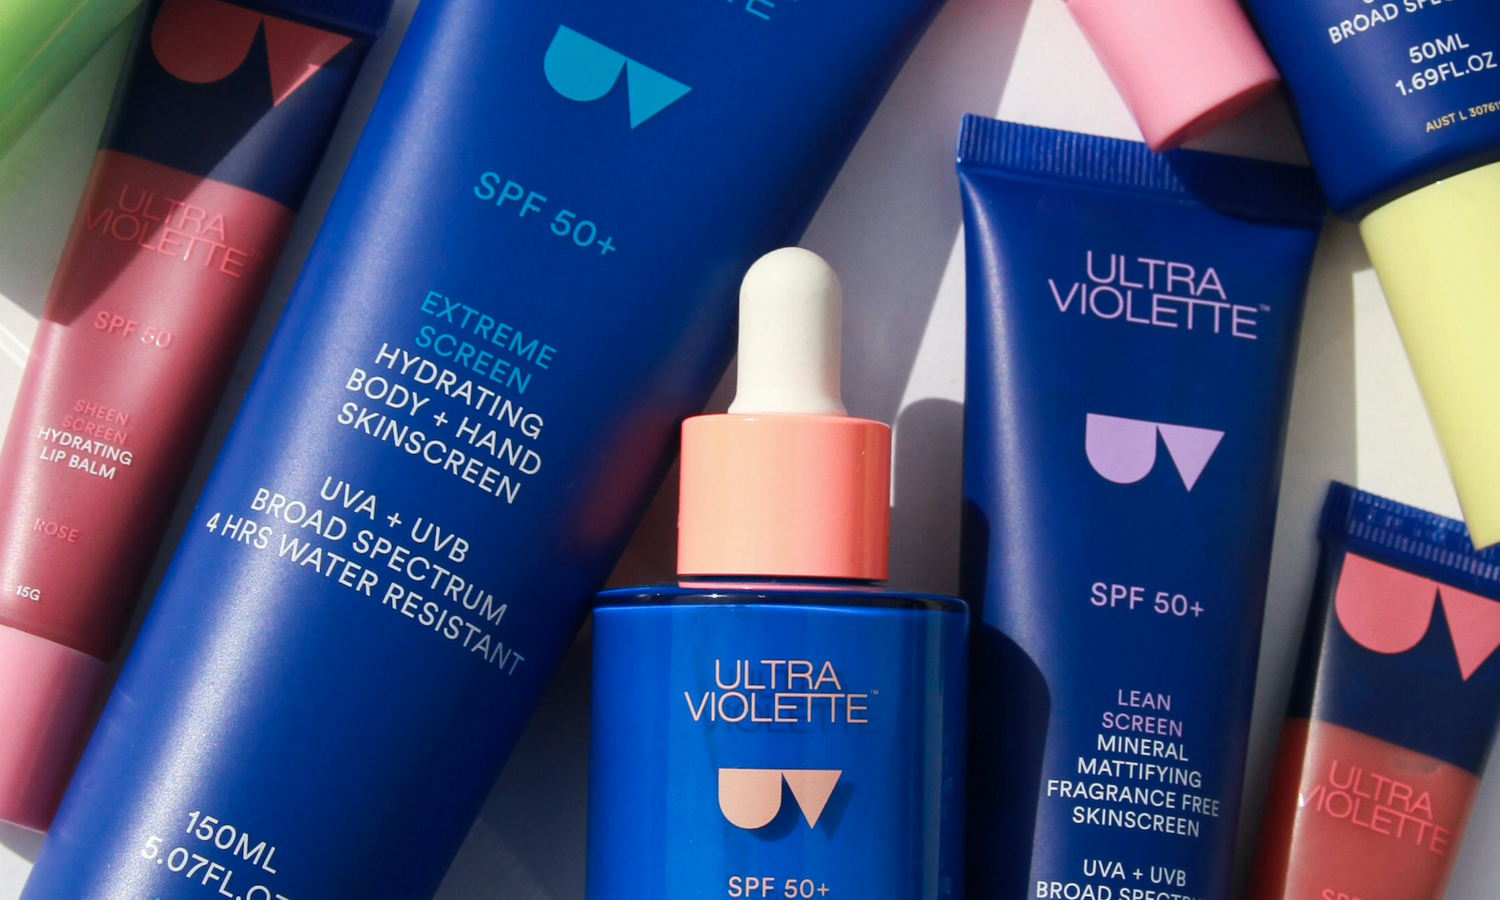 Ultra Violette Products laying down on a table.